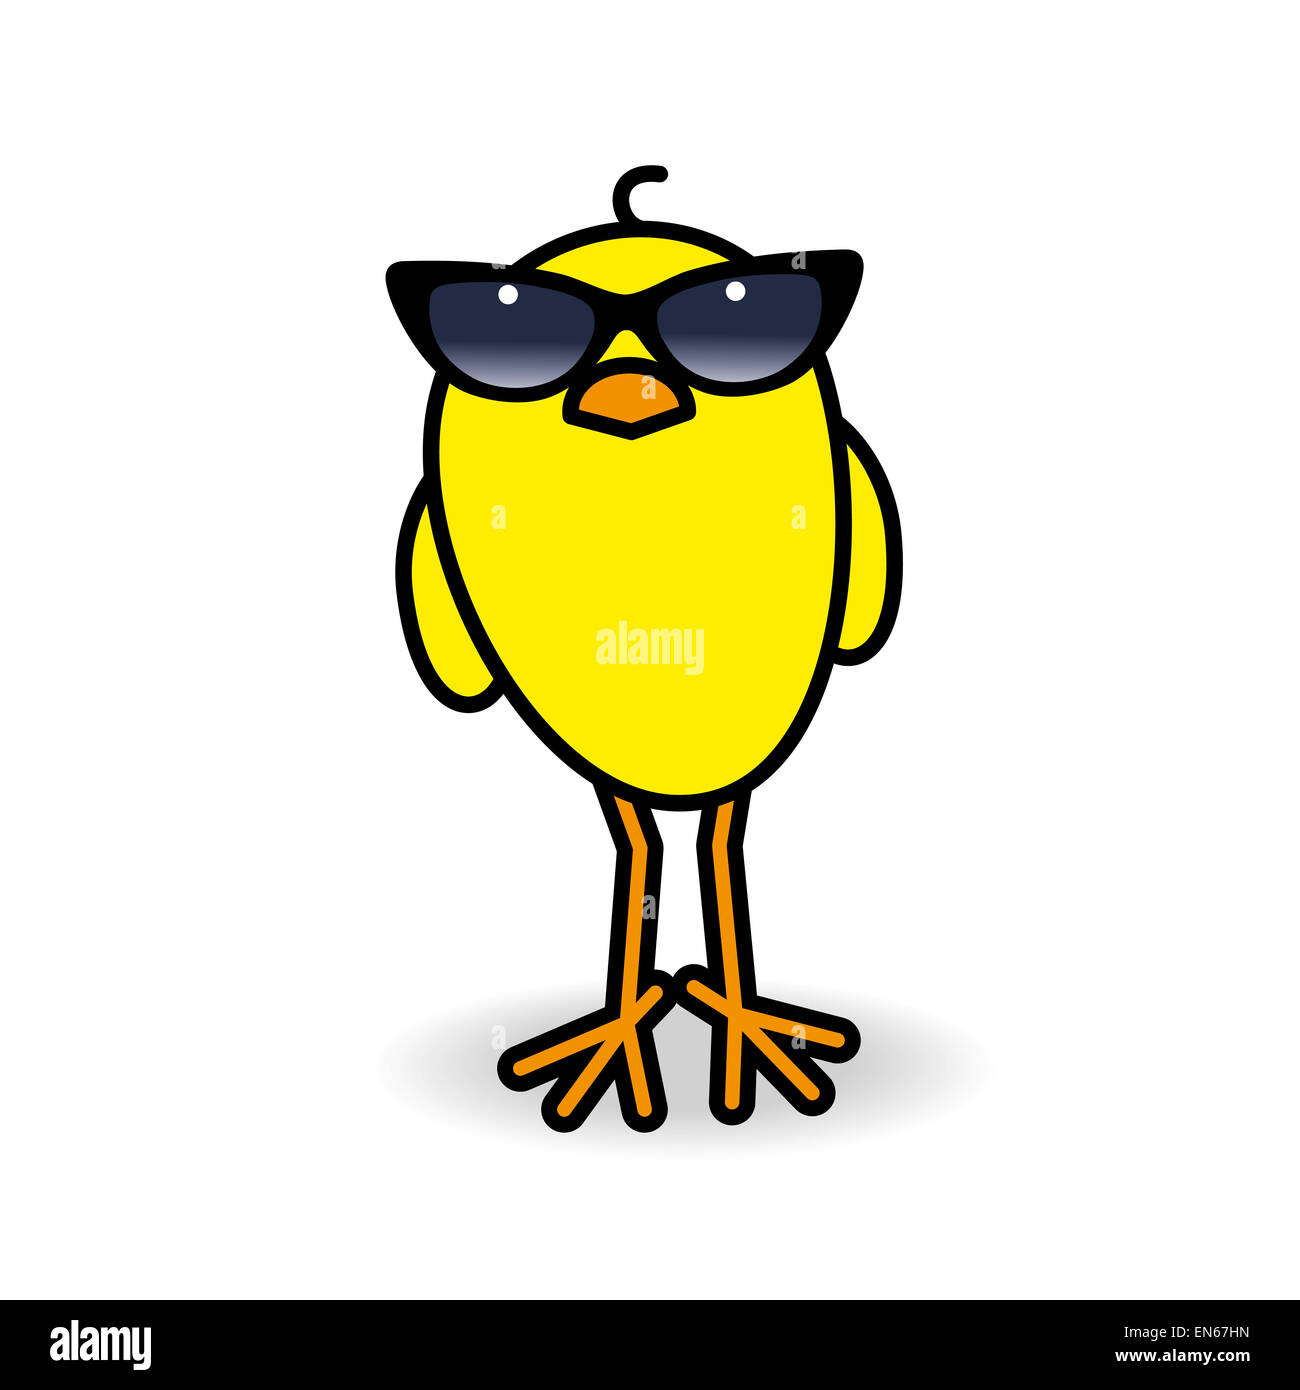 Single Yellow Chick Wearing Ladies Black Rimmed Sunglasses Staring towards camera on White Background Stock Photo